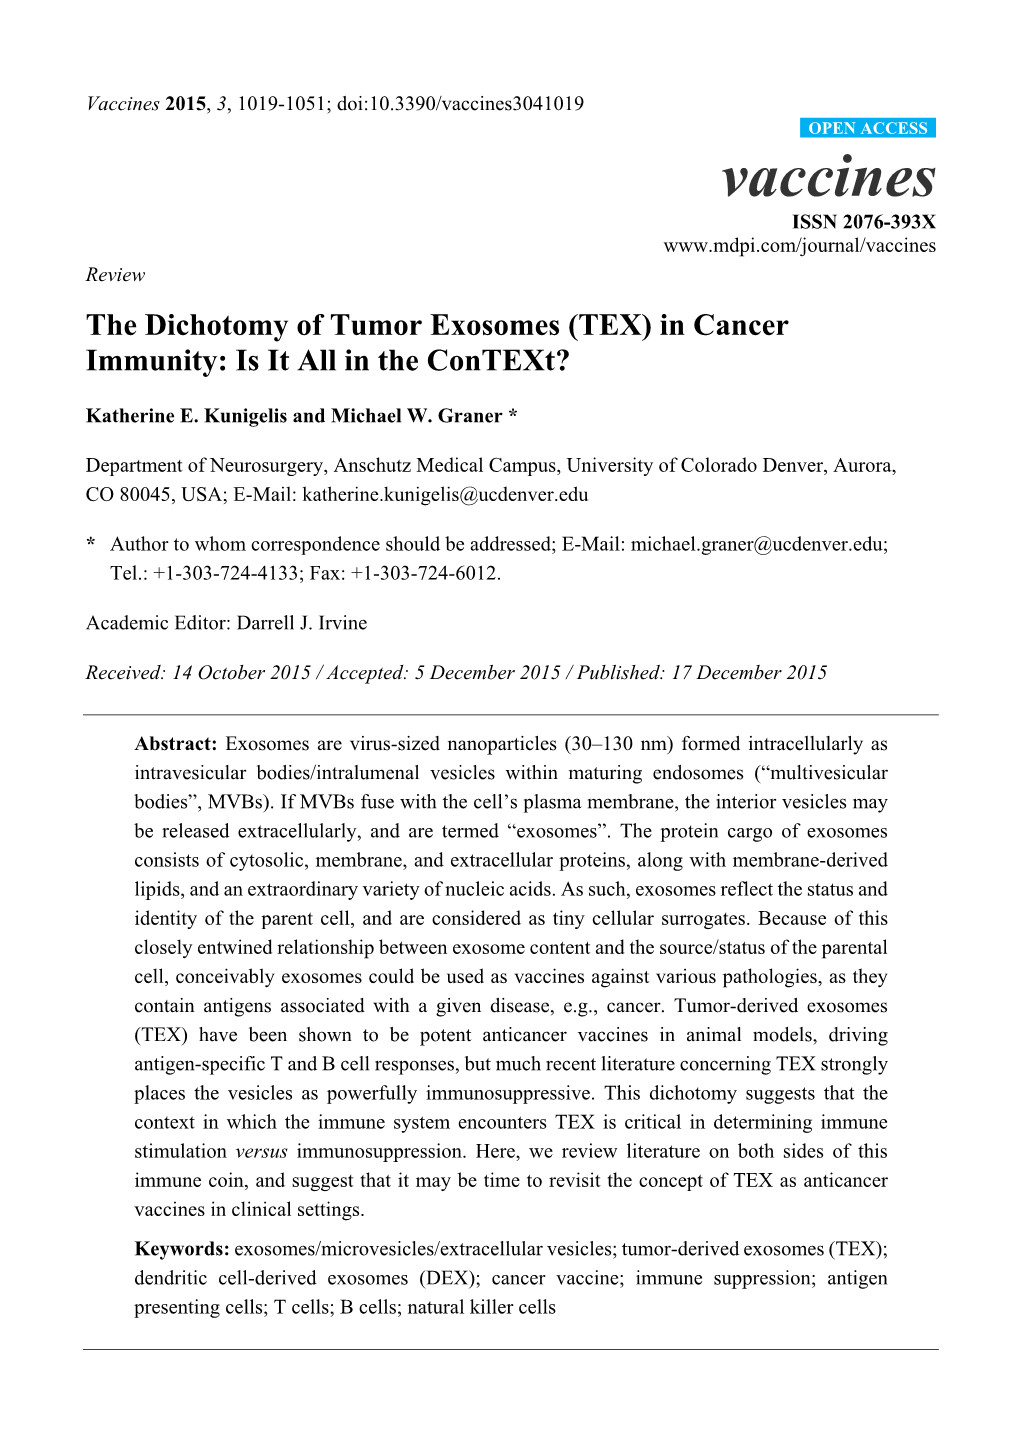 The Dichotomy of Tumor Exosomes (TEX) in Cancer Immunity: Is It All in the Context?